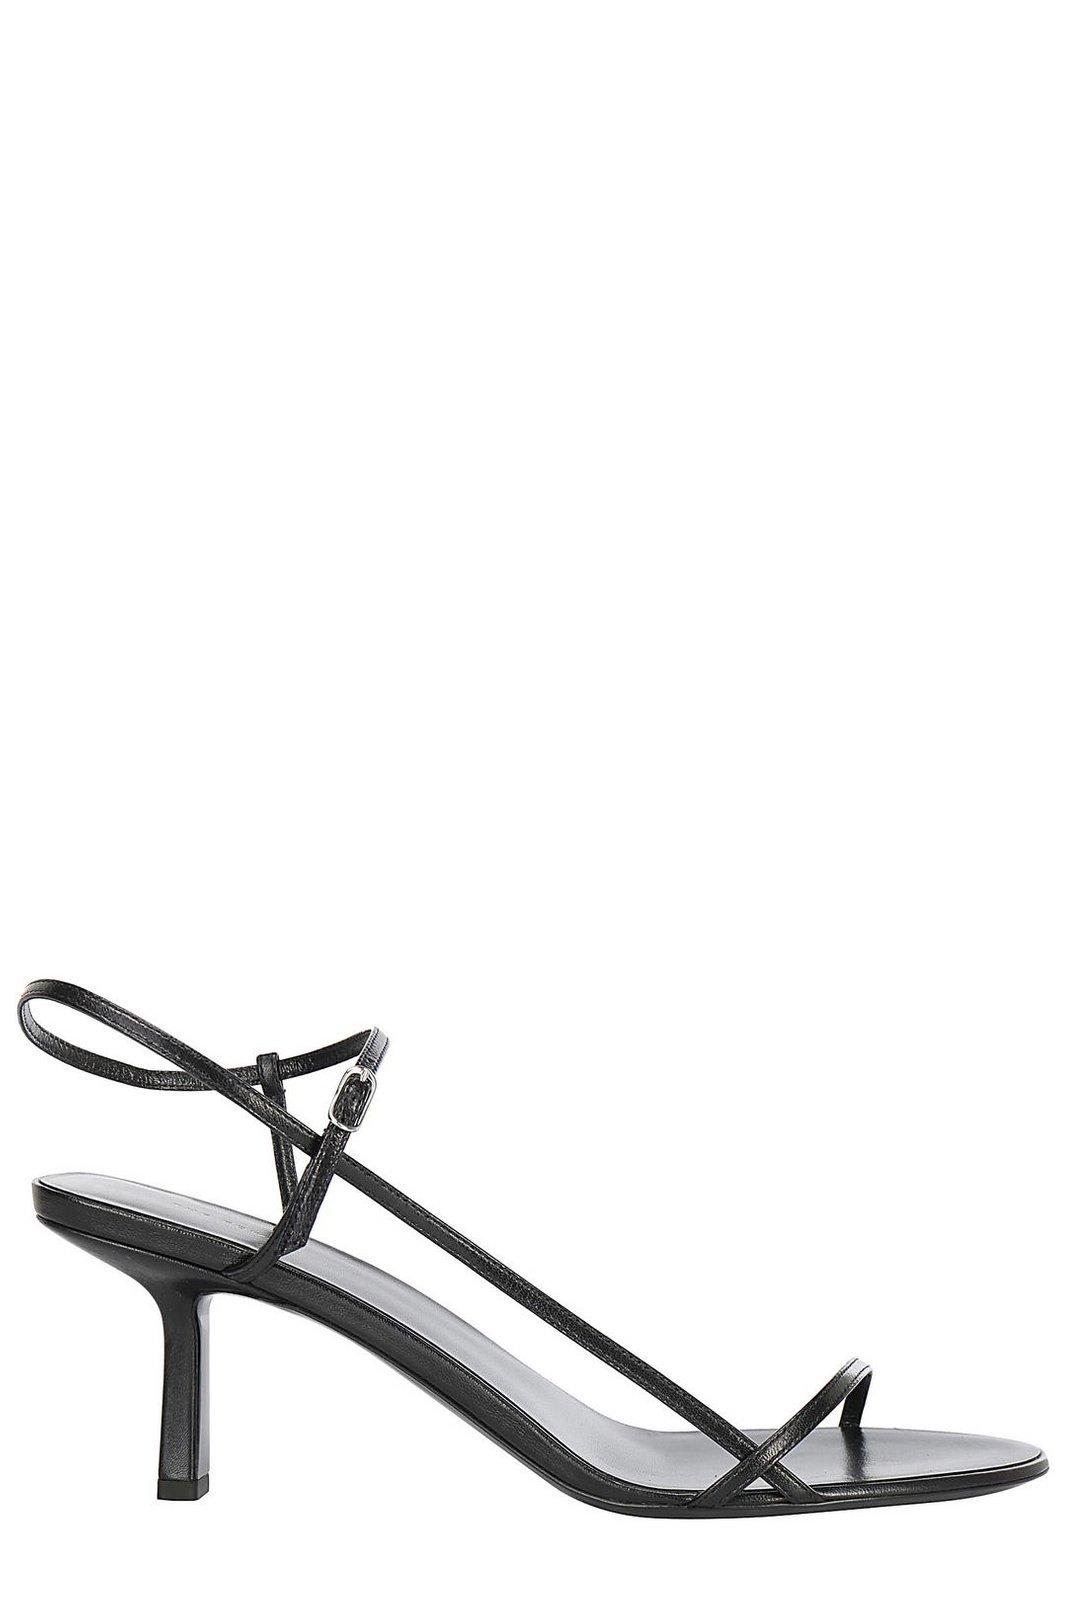 Shop The Row Bare Slingback Sandals In Black